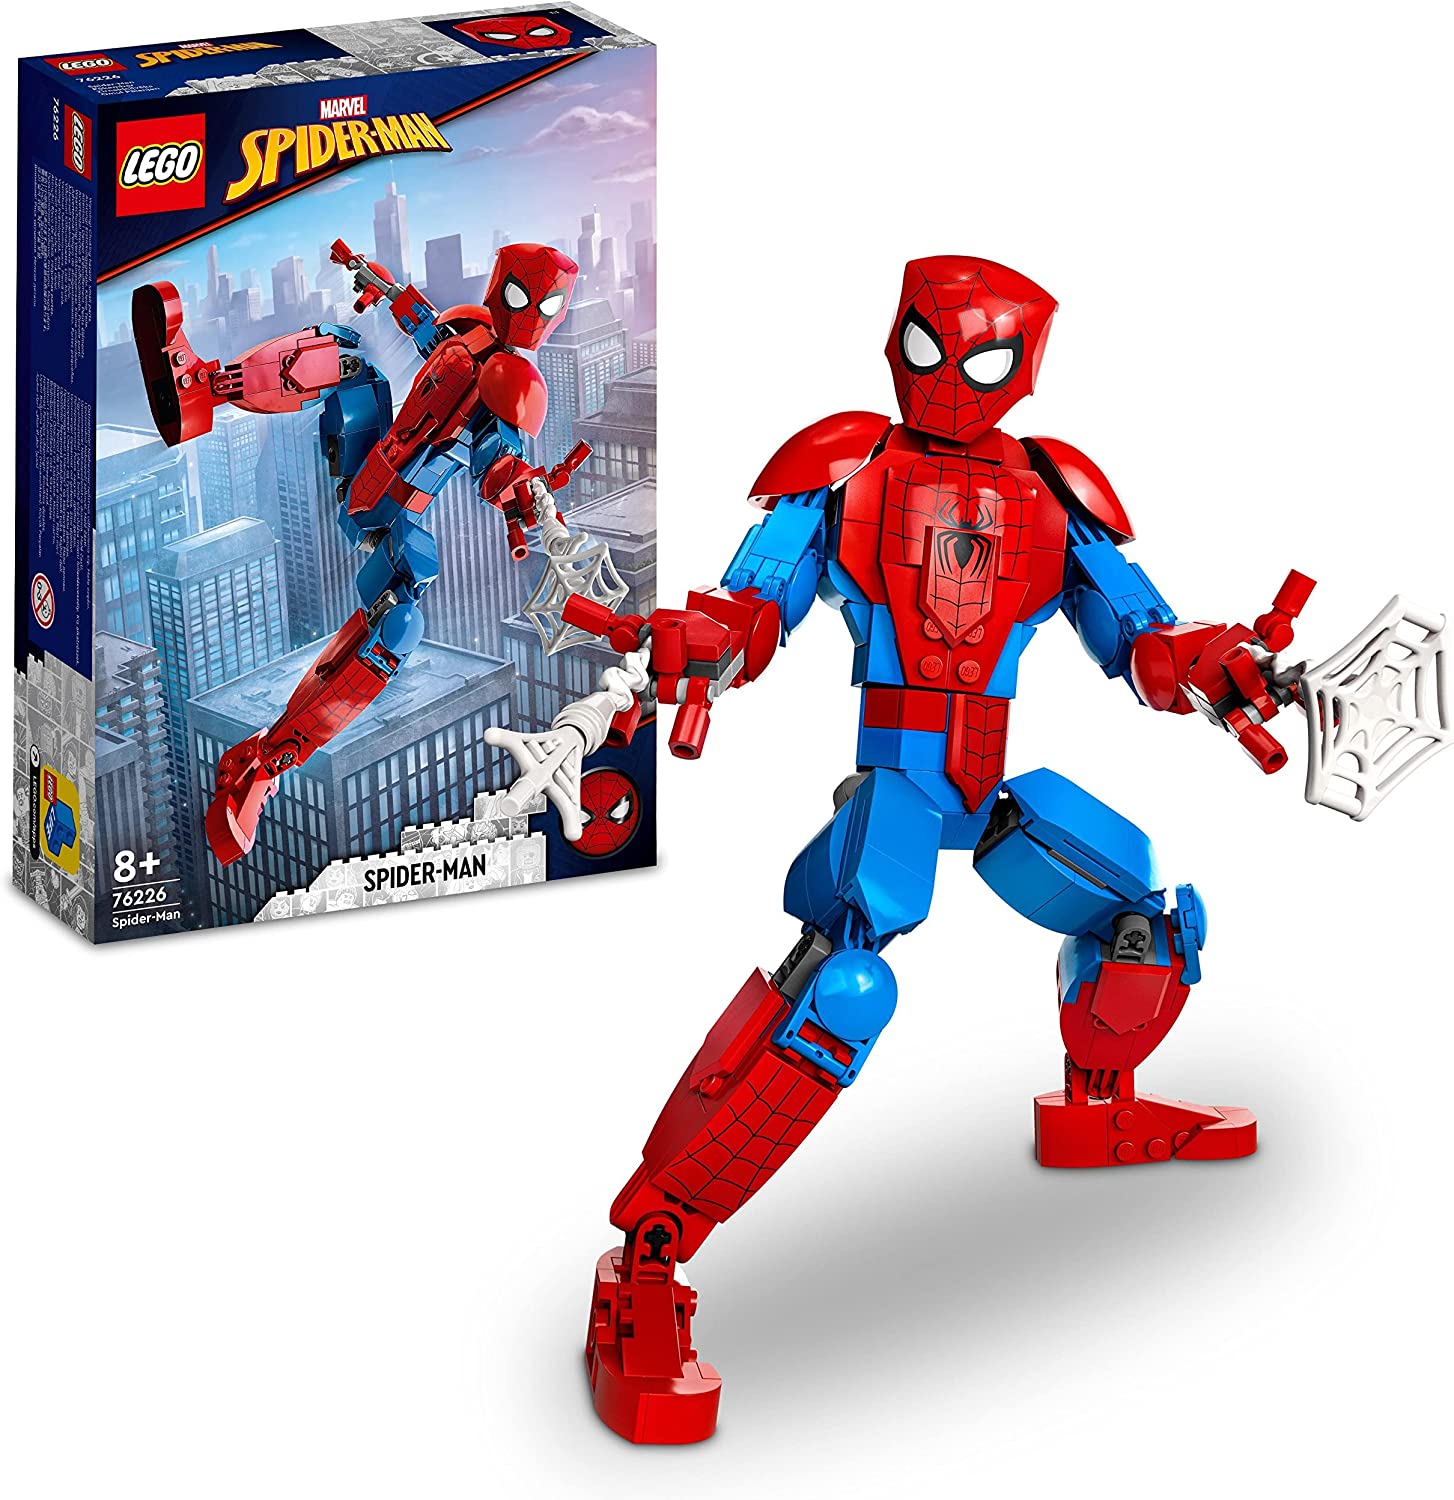 LEGO 76226 Marvel Spider-Man Figure, Fully Moving Action Toy, Collectable Superhero Set, Toy for Boys and Girls